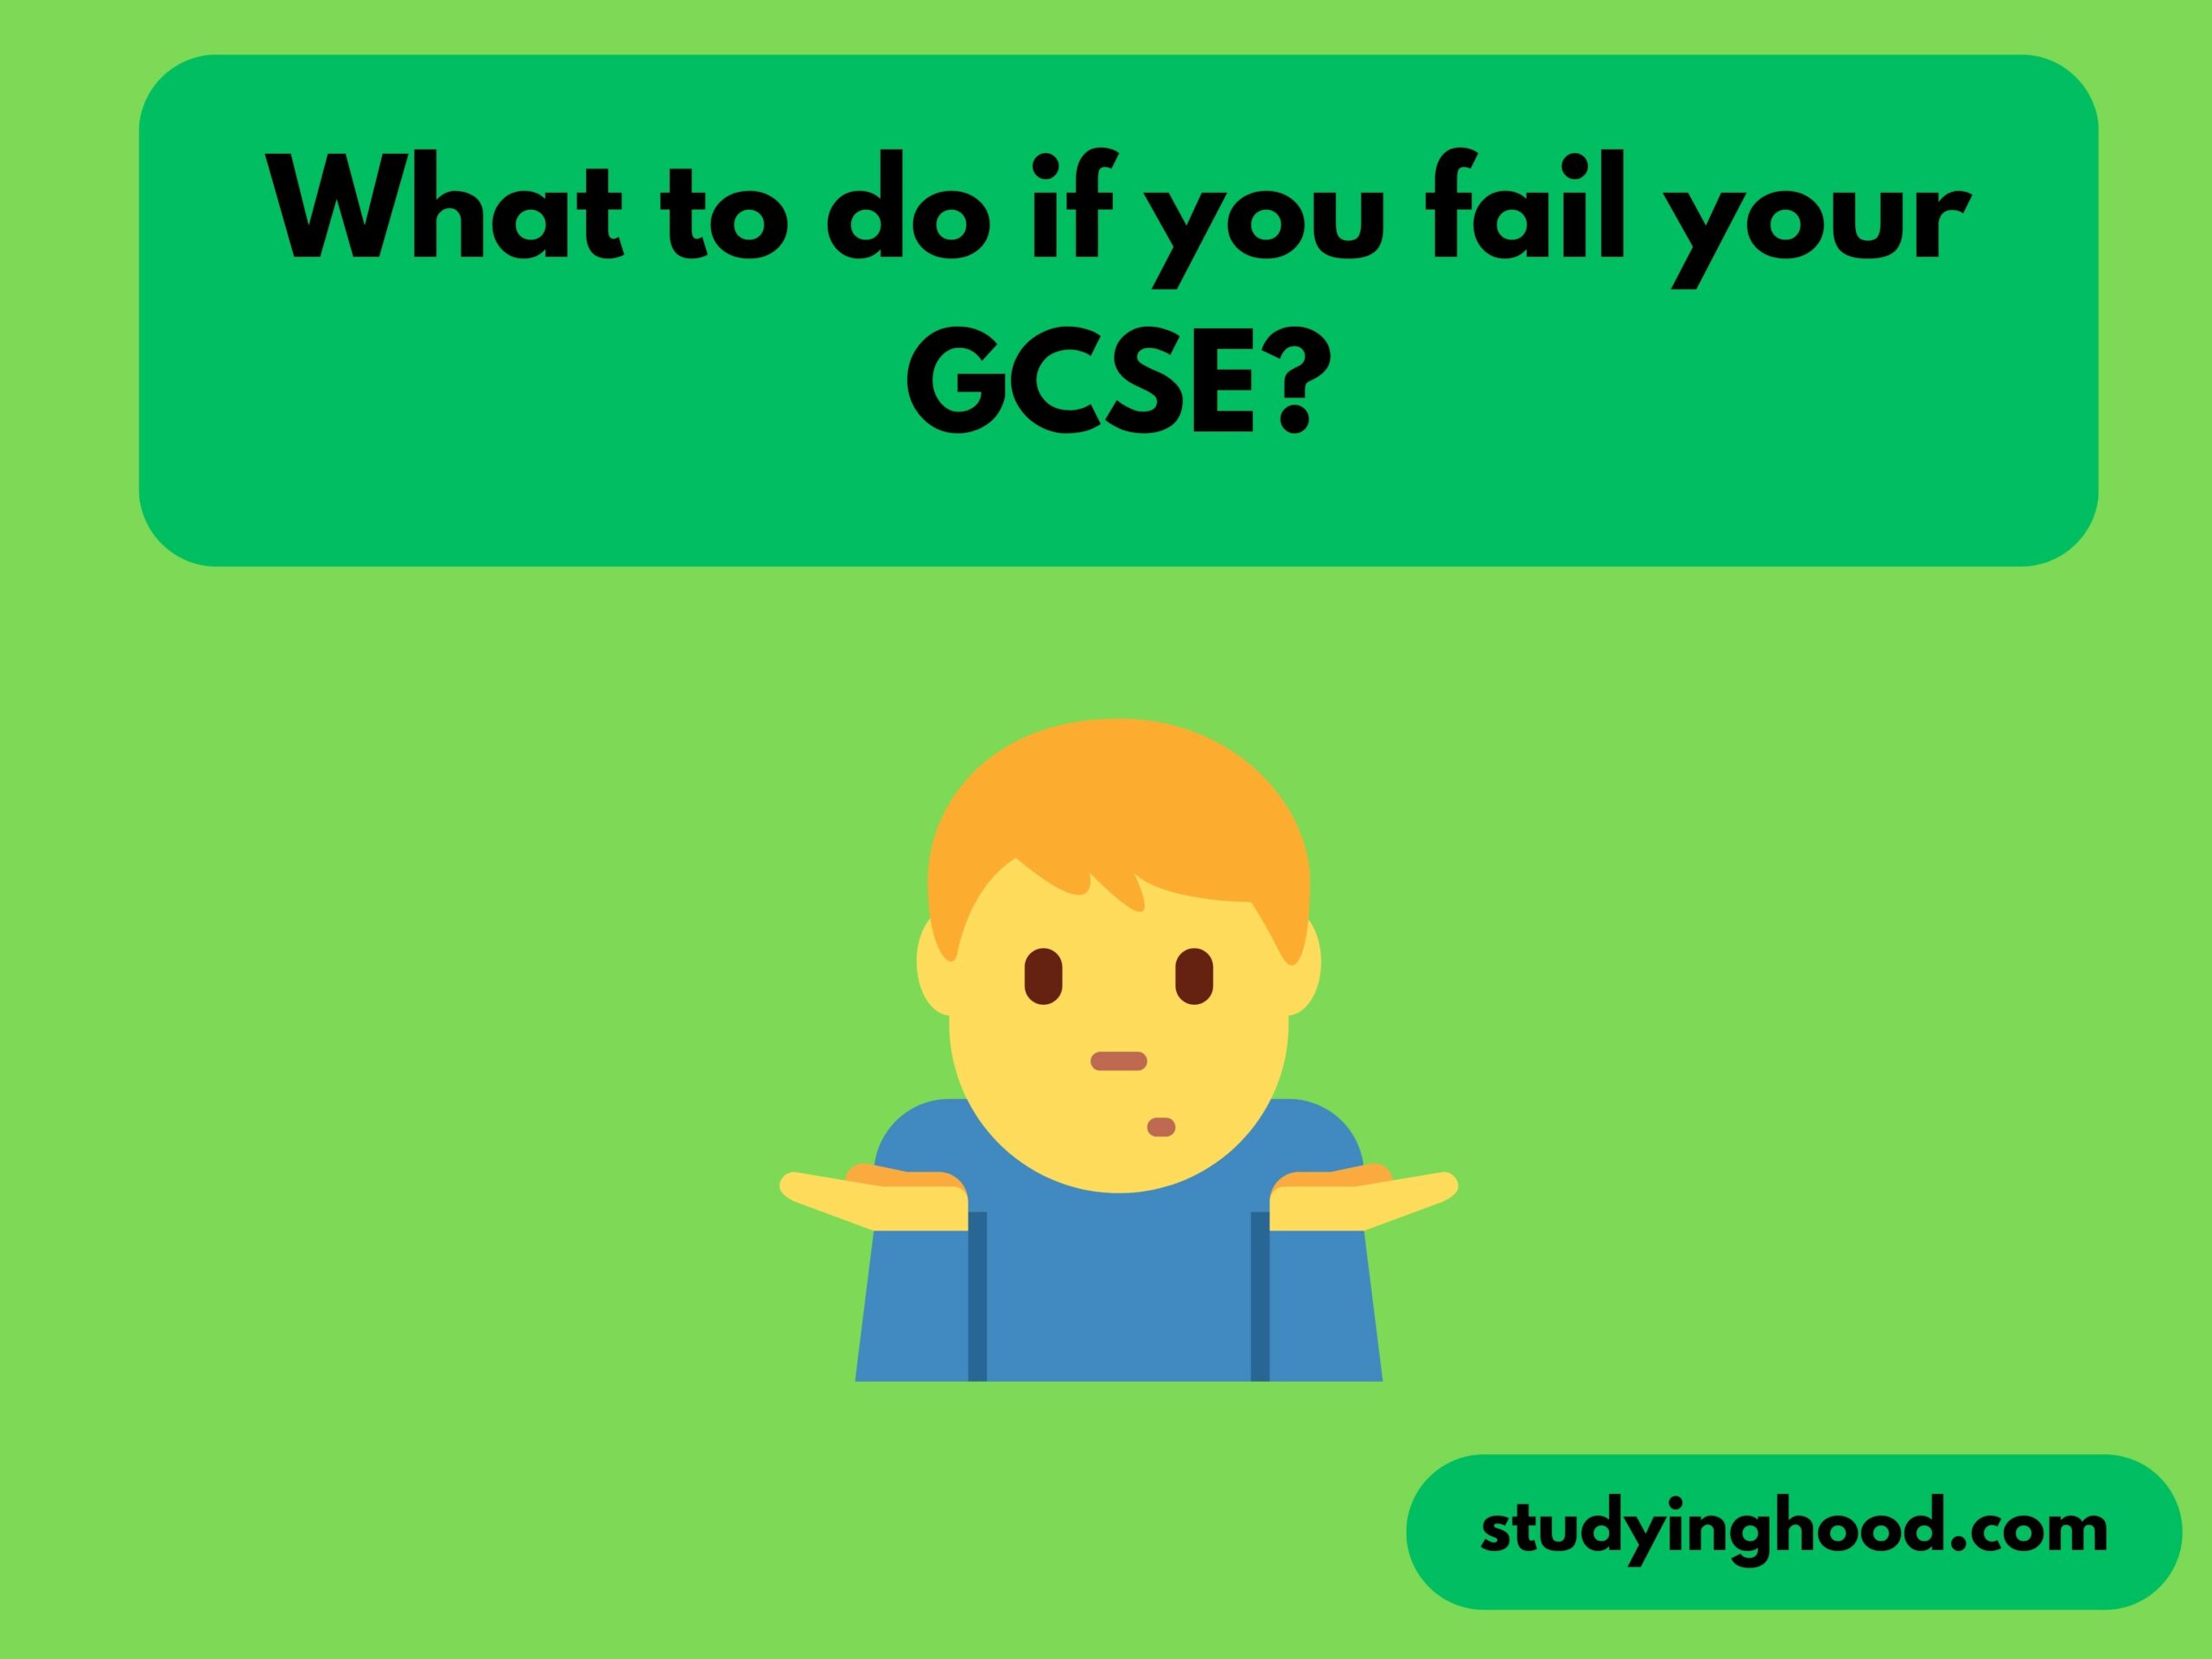 What to do if you fail your GCSE?